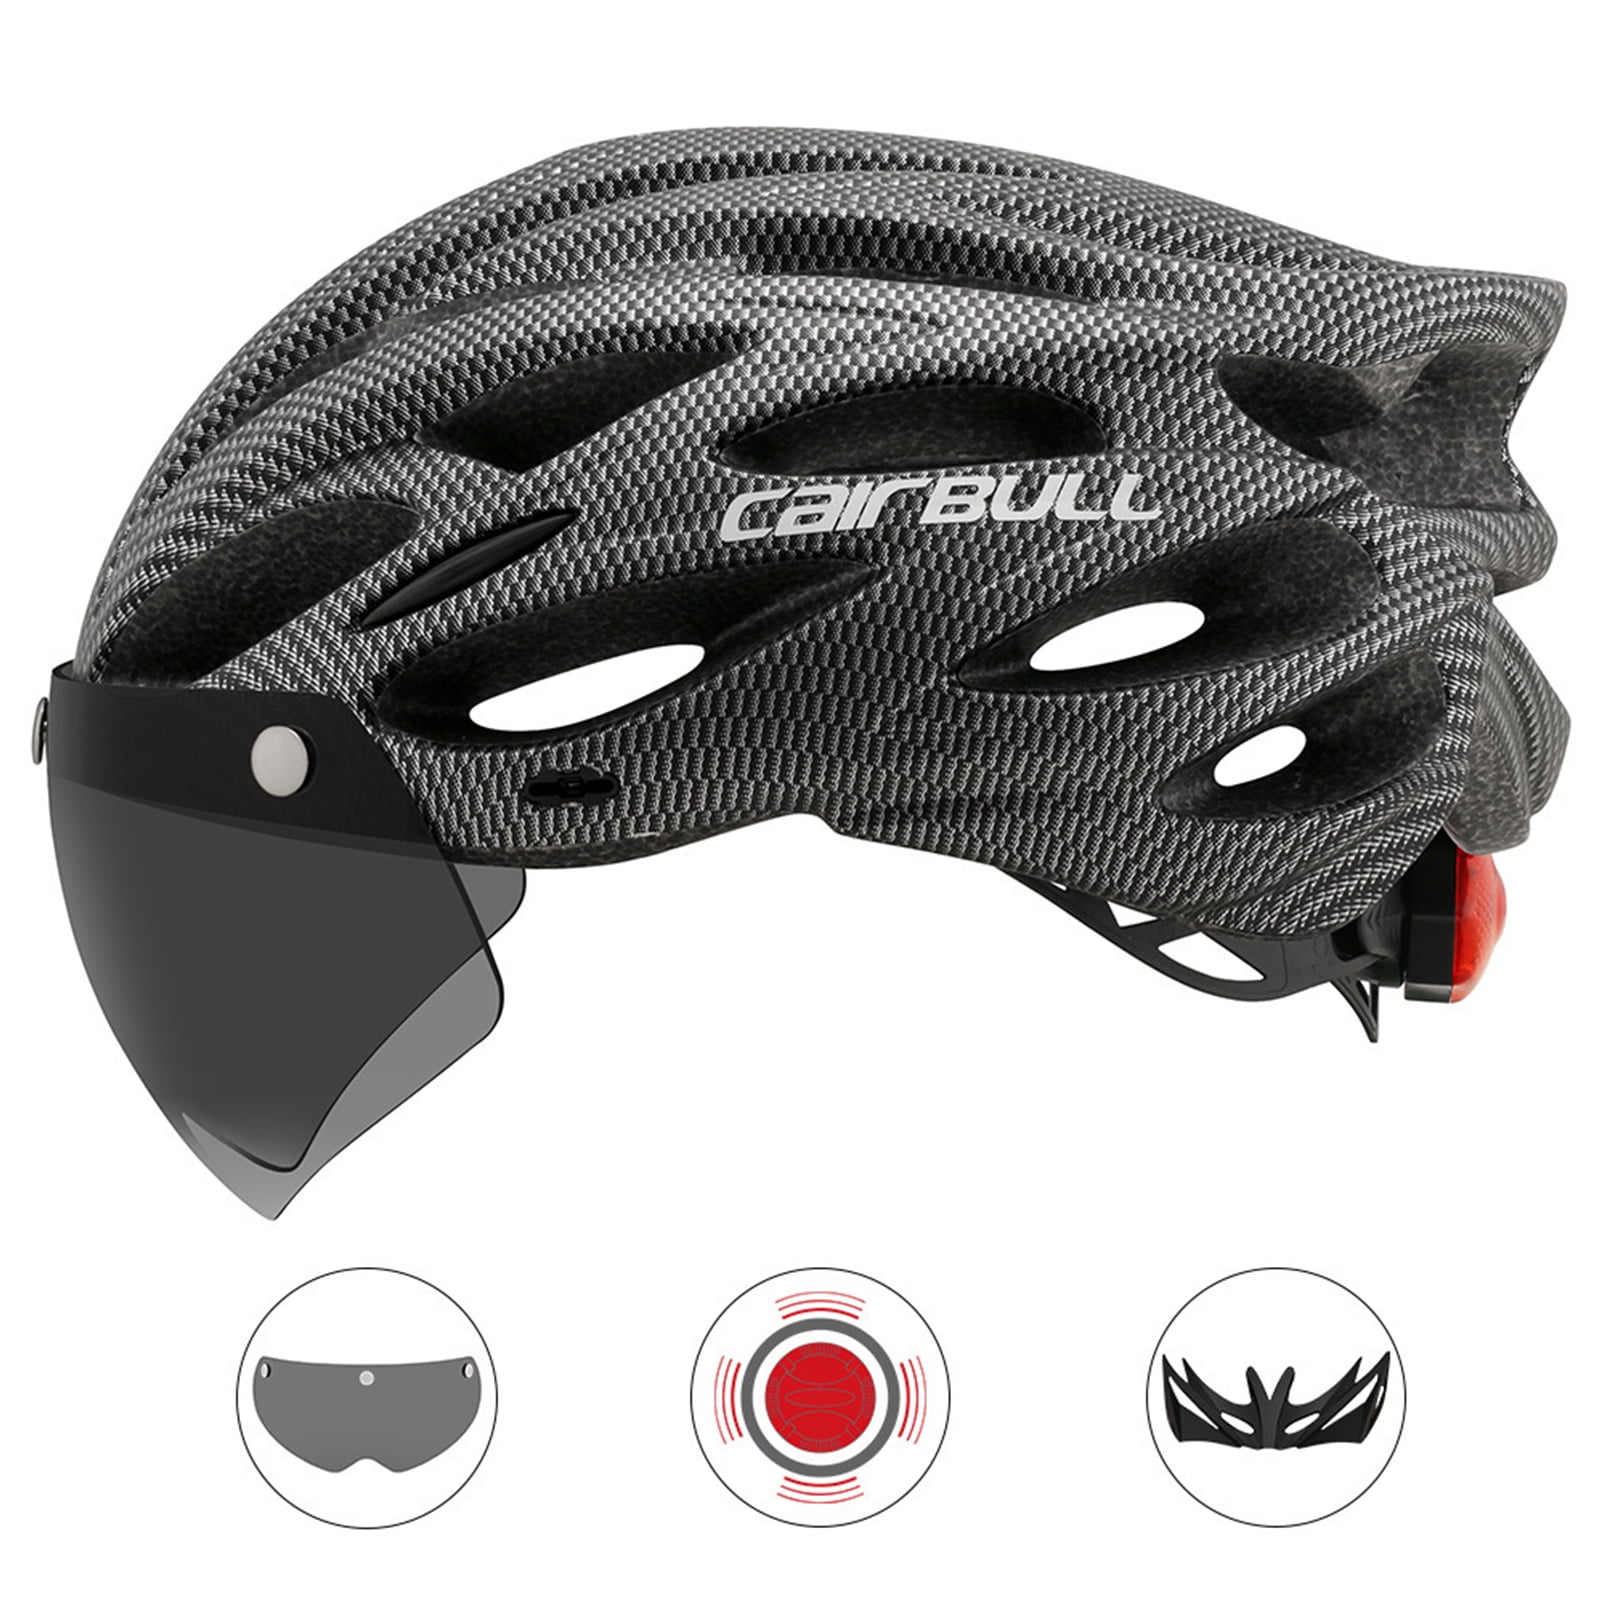 Details about   1Pcs PC+EPS MTB Mountain Bike Safety Helmet Bike With Tail Light 58-62cm 